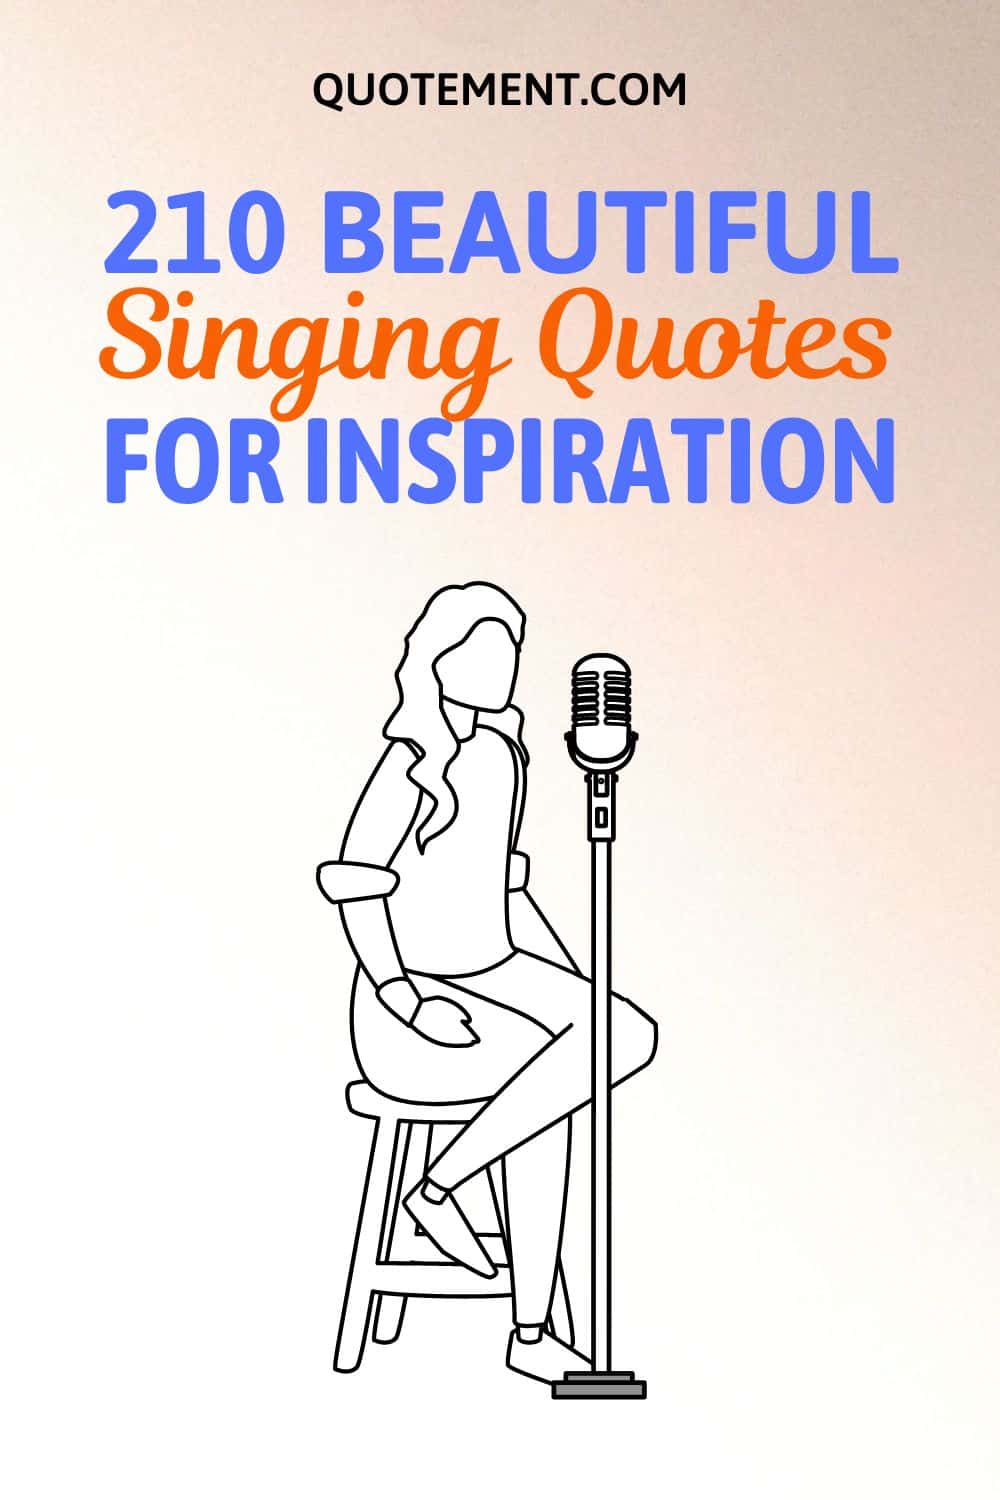 210 Best Singing Quotes To Make You Sing Your Heart Out
